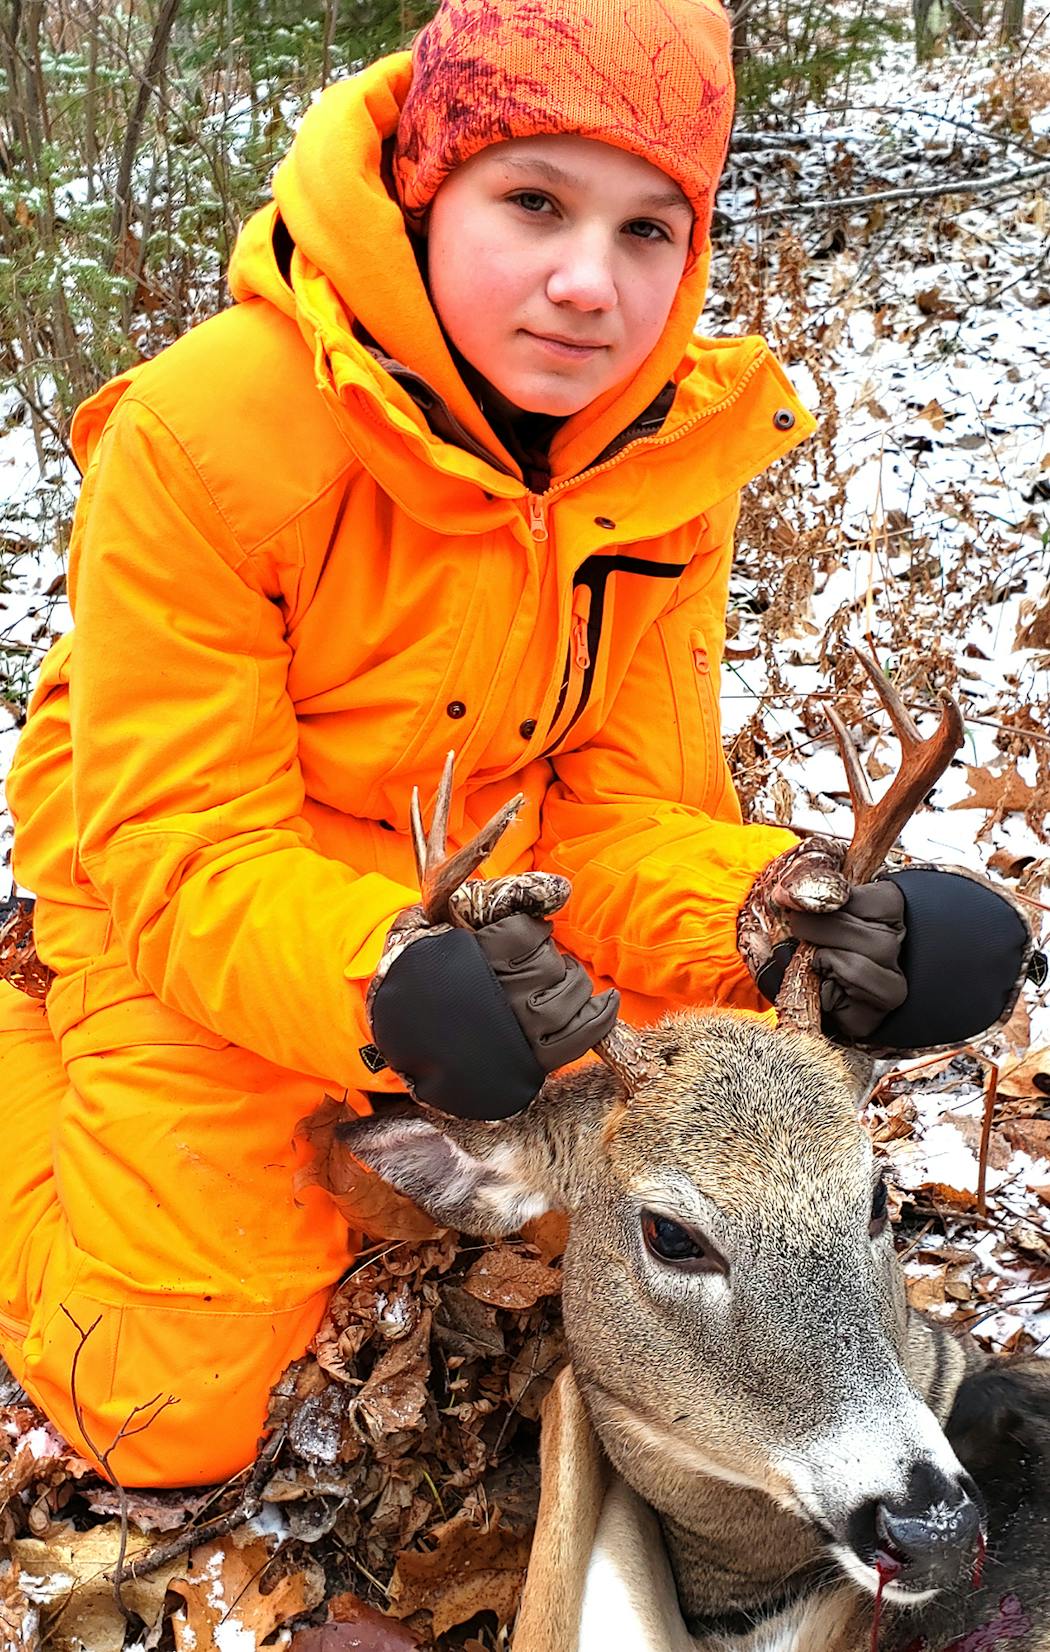 Carter Ernst, 13, of Eagan, shot his first deer, a 6-point buck, north of Grand Rapids, Minn., hunting with his dad, Joshua. This was Carter’s first year in deer camp, and he and his dad waited patiently in their stand on opening morning. When Carter’s buck emerged from a swamp, he lined up a 60-yard shot and hit dead center. “I couldn’t be prouder,’’ his dad said.